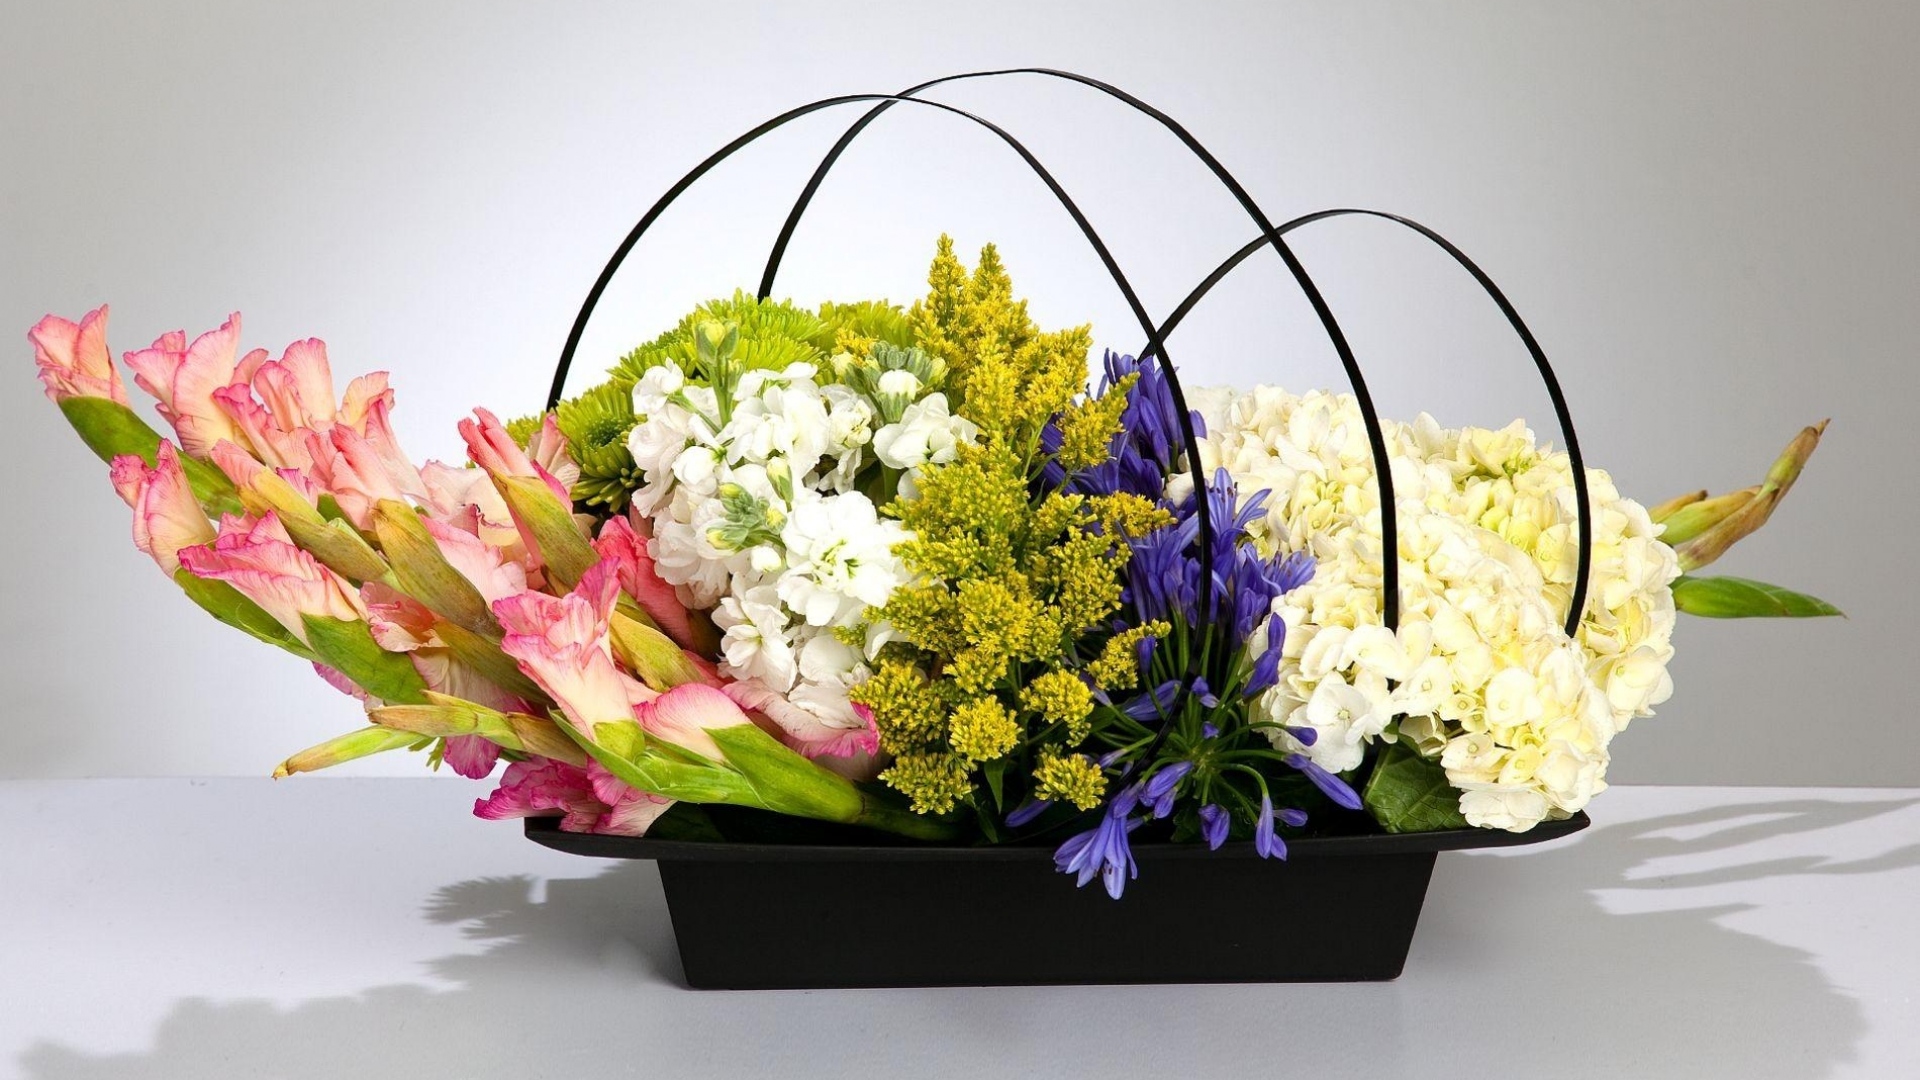 Basket With Flowers wallpaper download